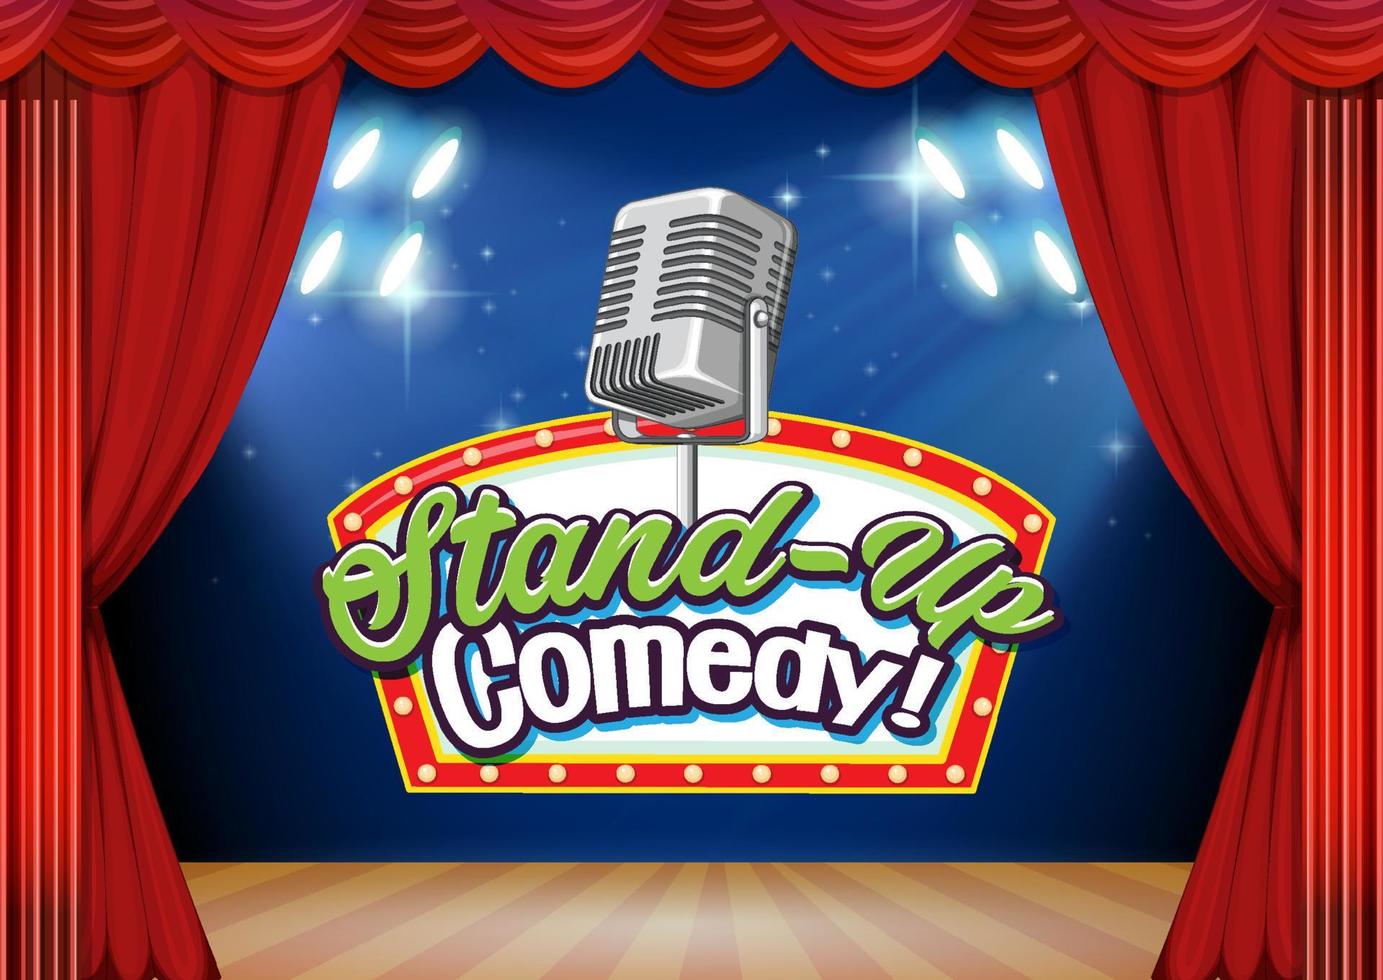 stand-up comedy banner met vintage microfoon vector